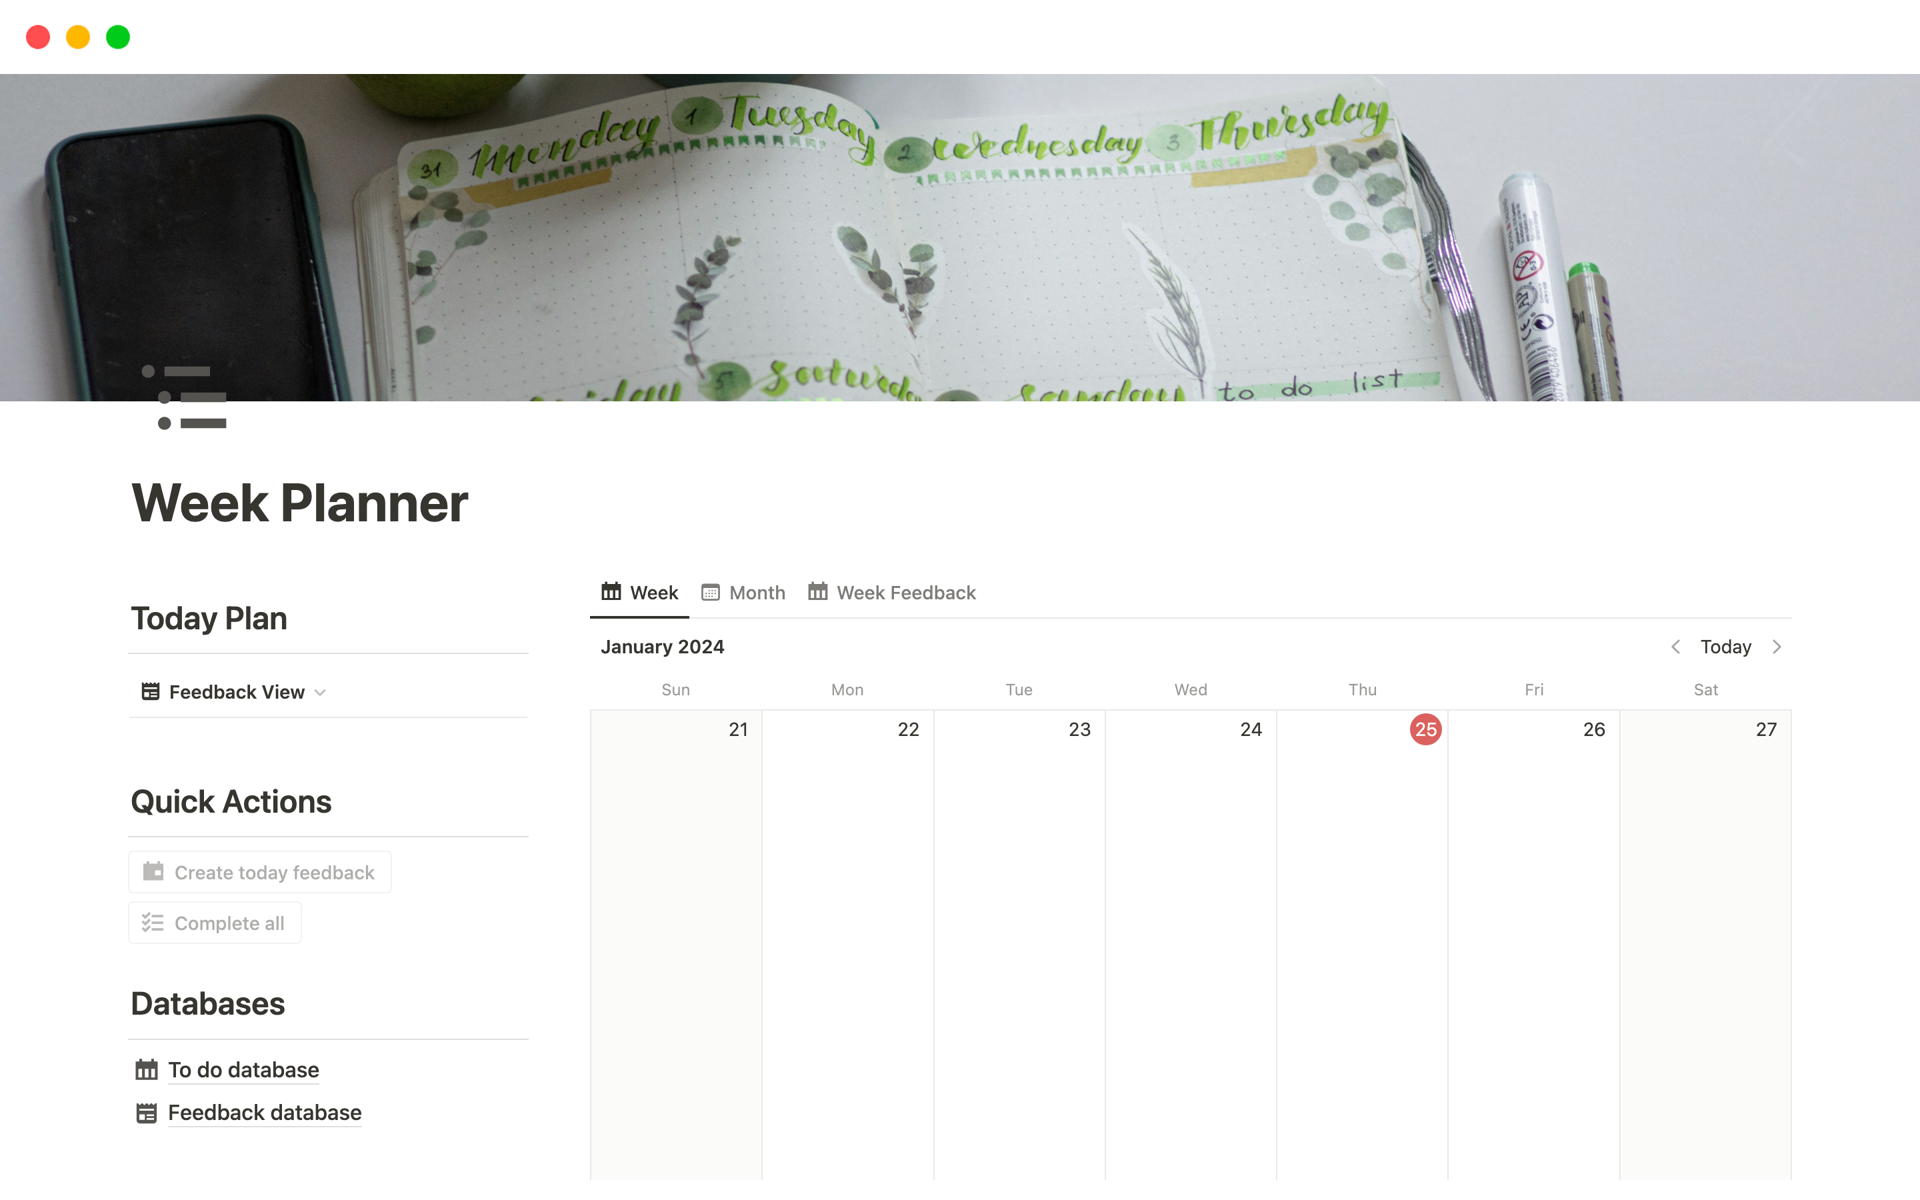 Plan your week and get feedback with a beautiful layout